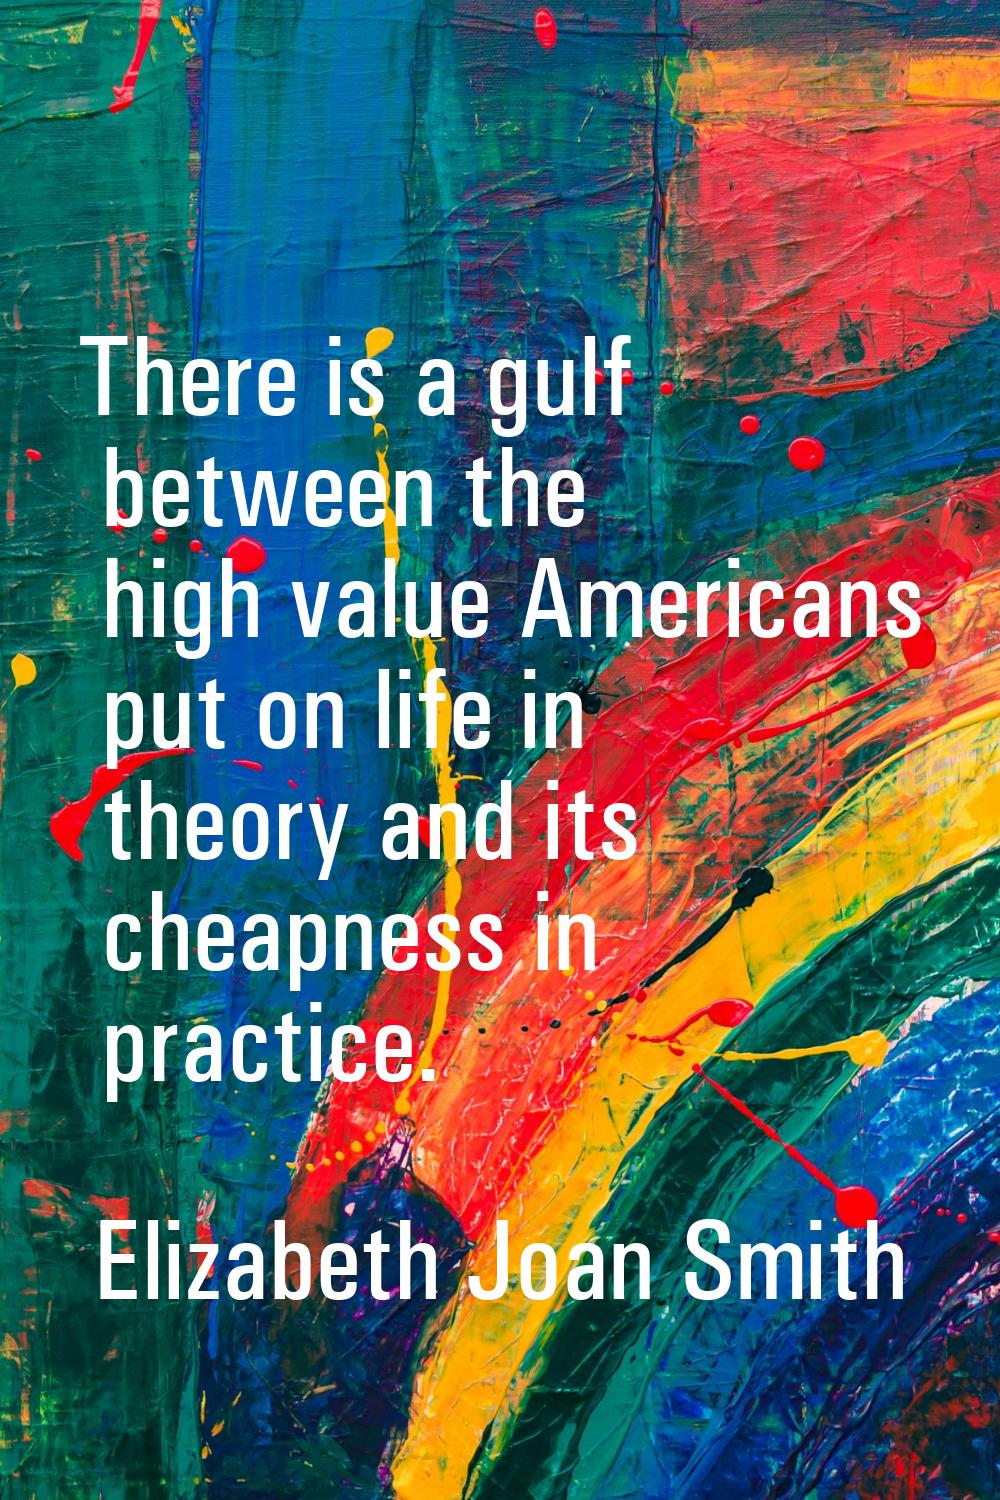 There is a gulf between the high value Americans put on life in theory and its cheapness in practic